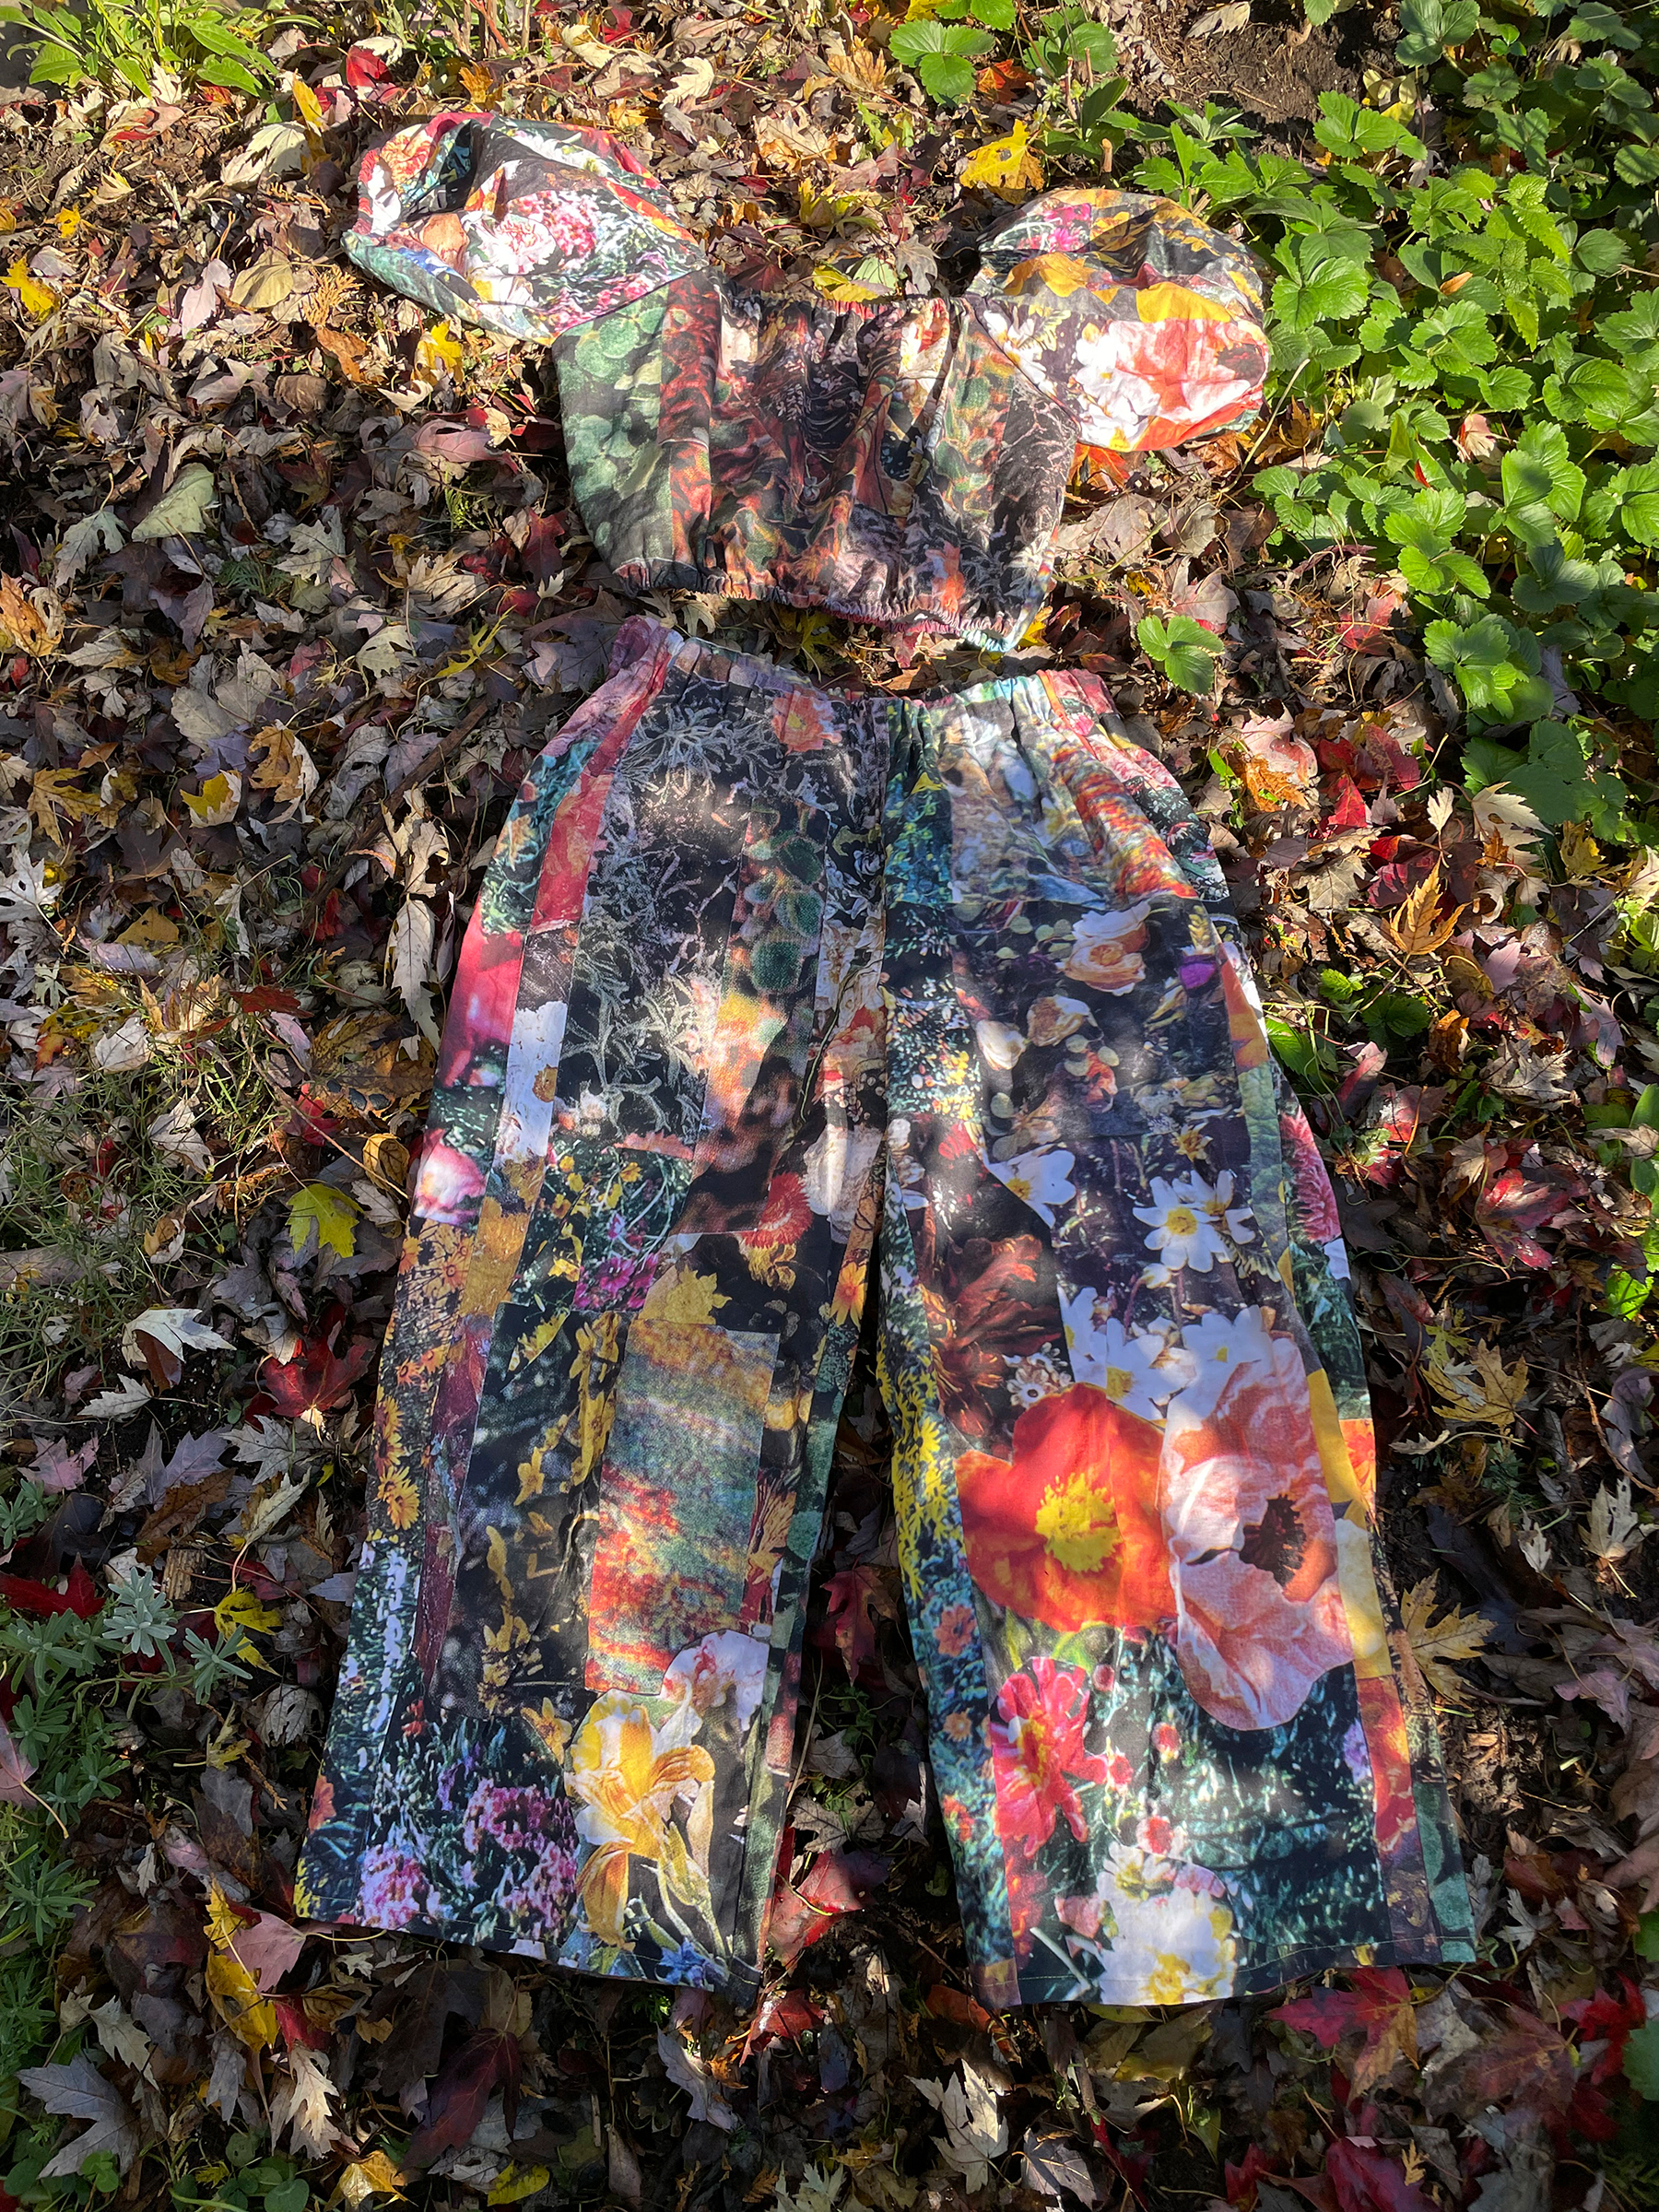     Maggie Groat, for 13 minutes in a garden, 2021, (custom-printed fabric). Courtesy of the artist

